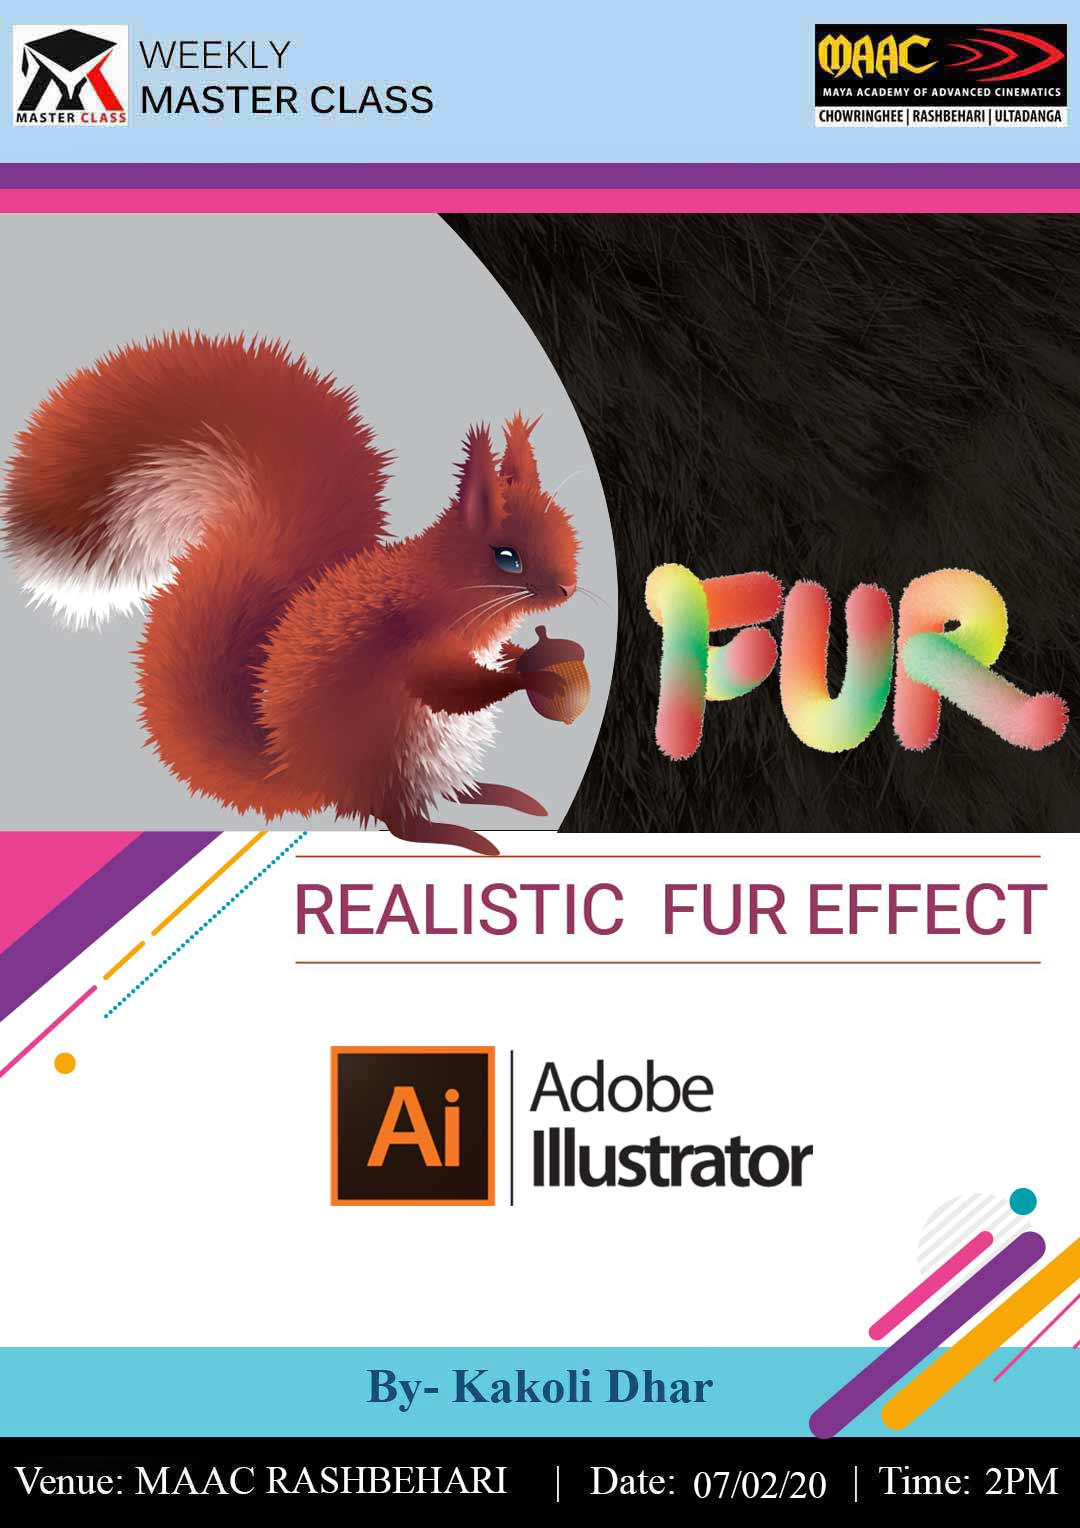 Weekly Master Class on Realistic Fur Effect in Illustrator